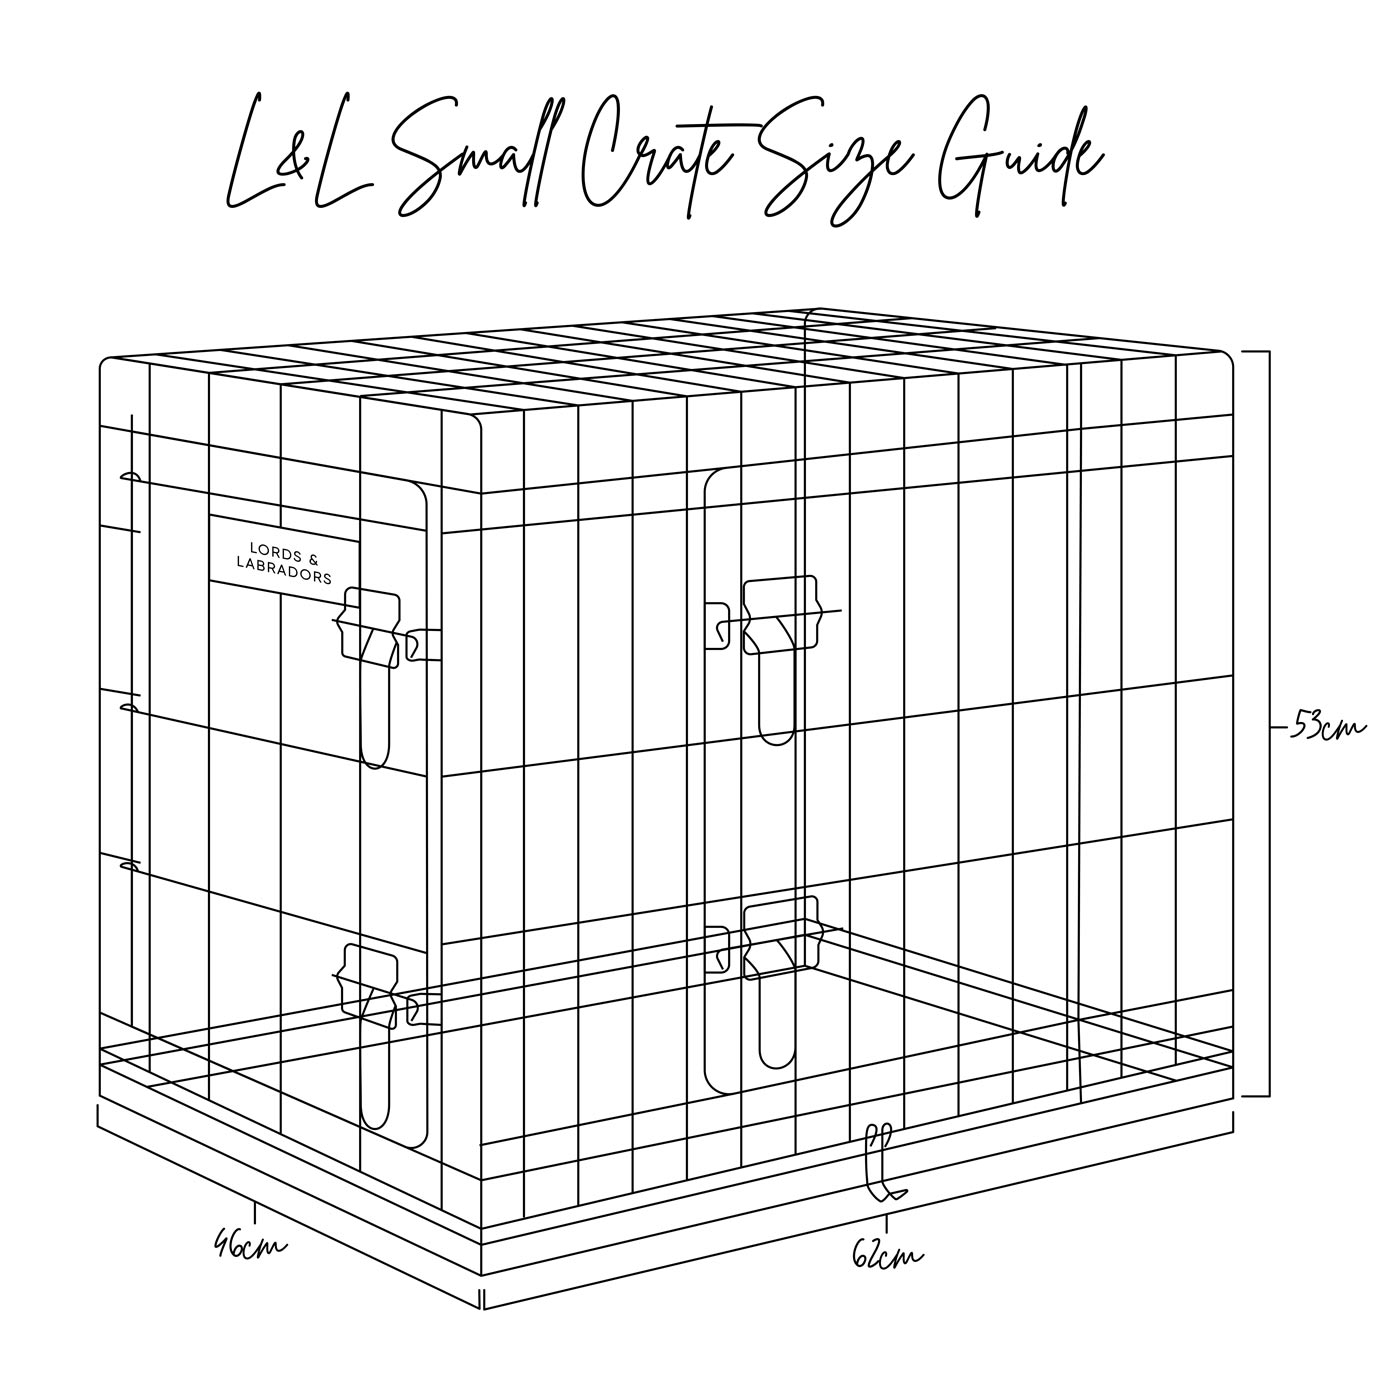 Discover the perfect deluxe heavy duty Black dog cage, featuring two doors for easy access and a removable tray for easy cleaning! The ideal choice to keep new puppies safe, made using pet safe galvanised steel! Available now in 5 sizes and three stunning colors at Lords & Labradors US